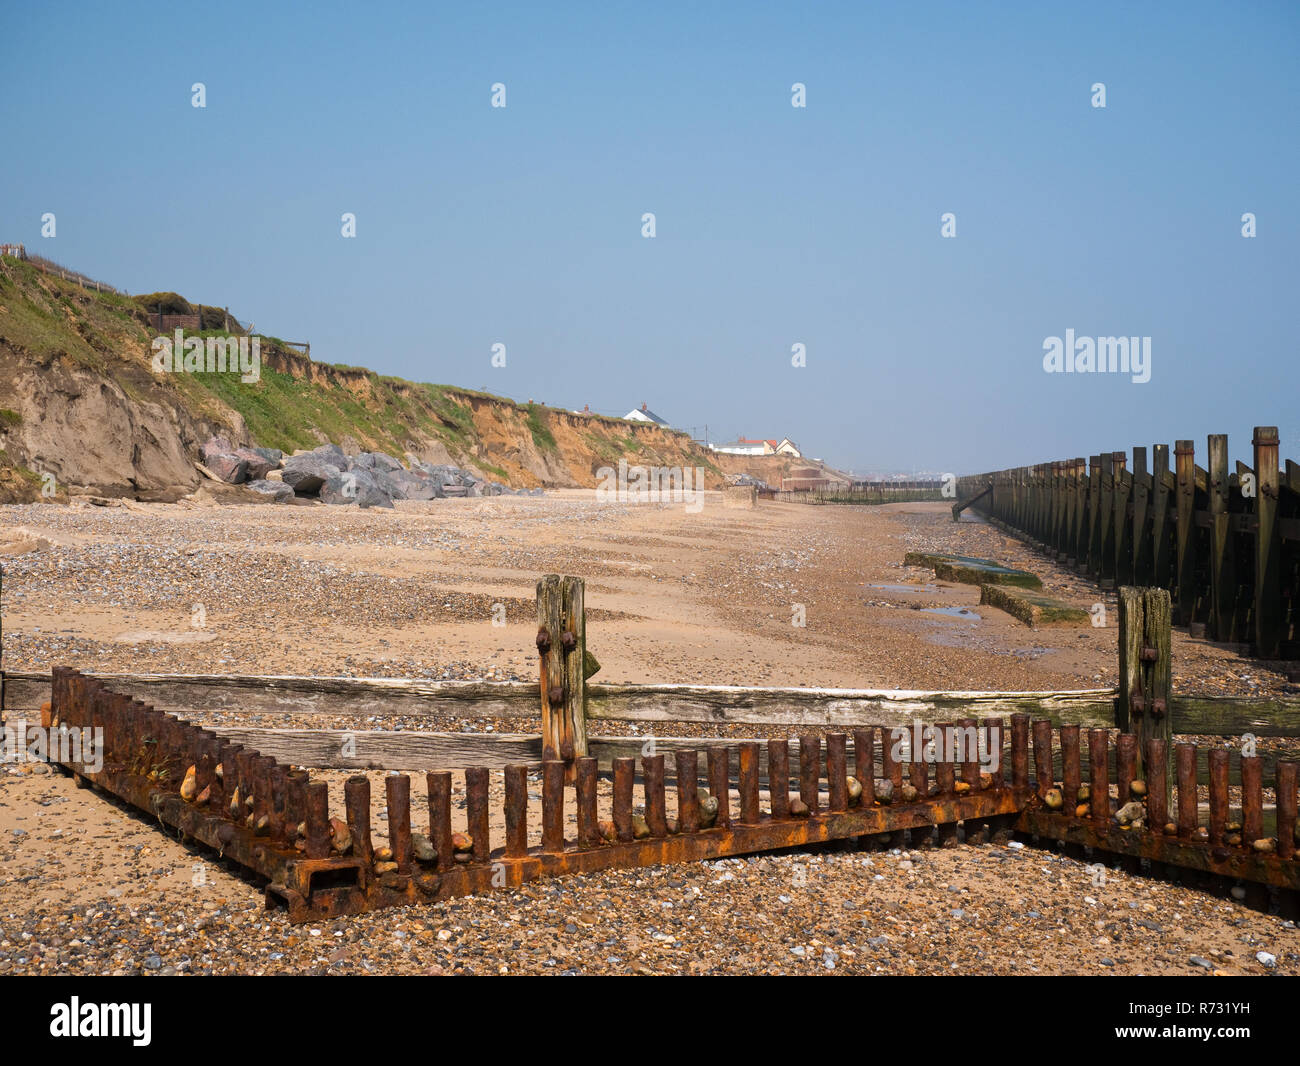 The beach at Happisburgh, Norfolk, showing  cliff erosion and sea defences Stock Photo